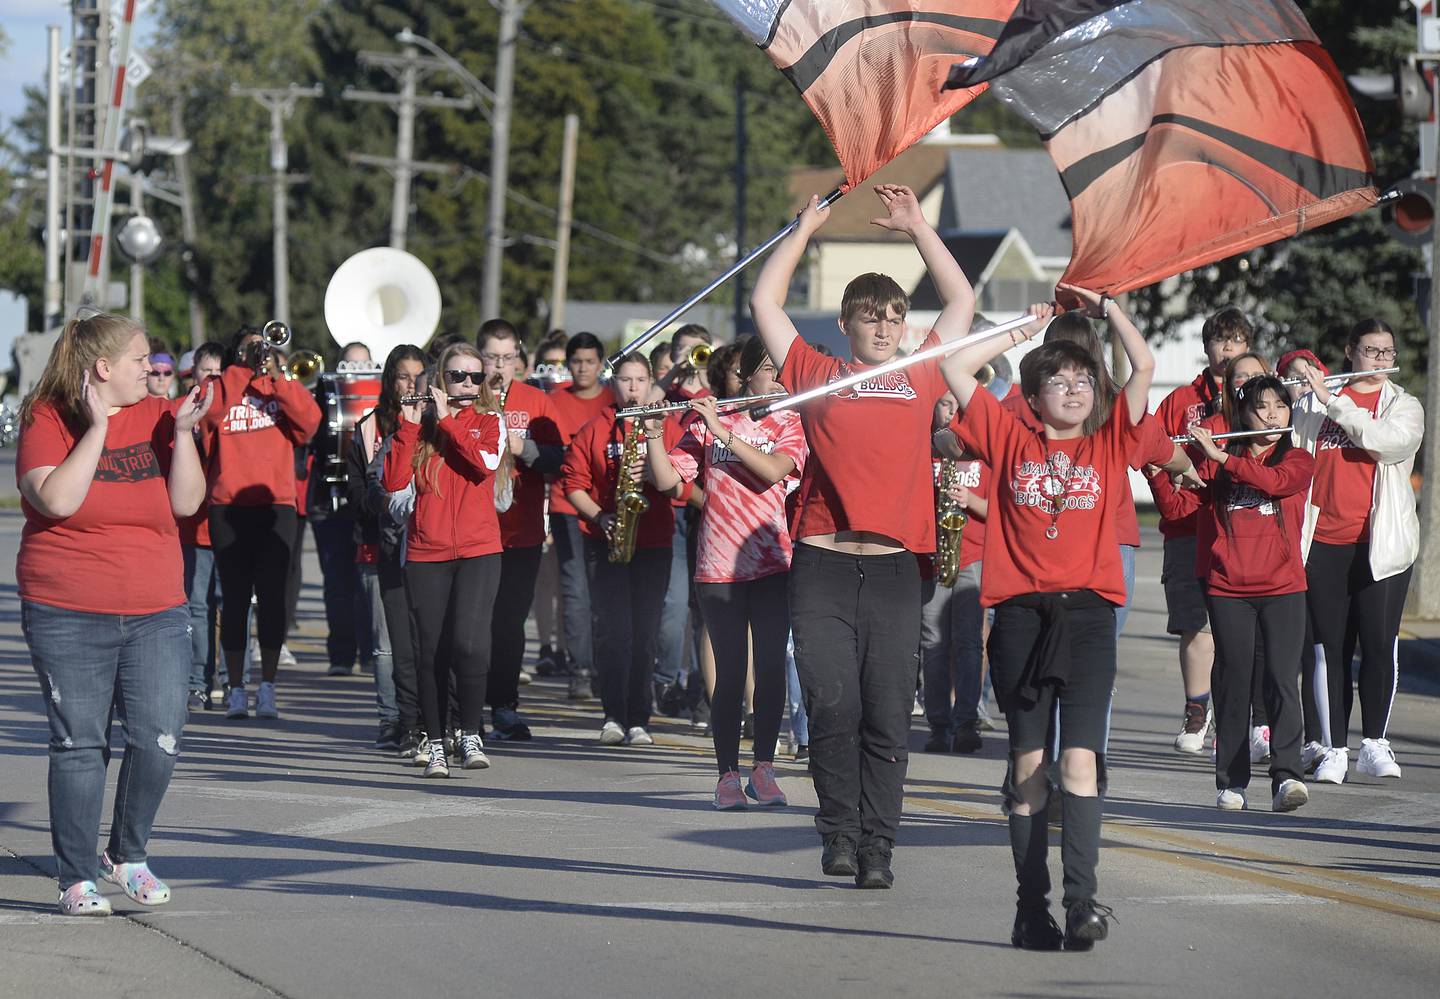 The Streator High School marching band performs Wednesday, Sept. 28, 2022, as they make their way down Main Street during the school’s homecoming parade.